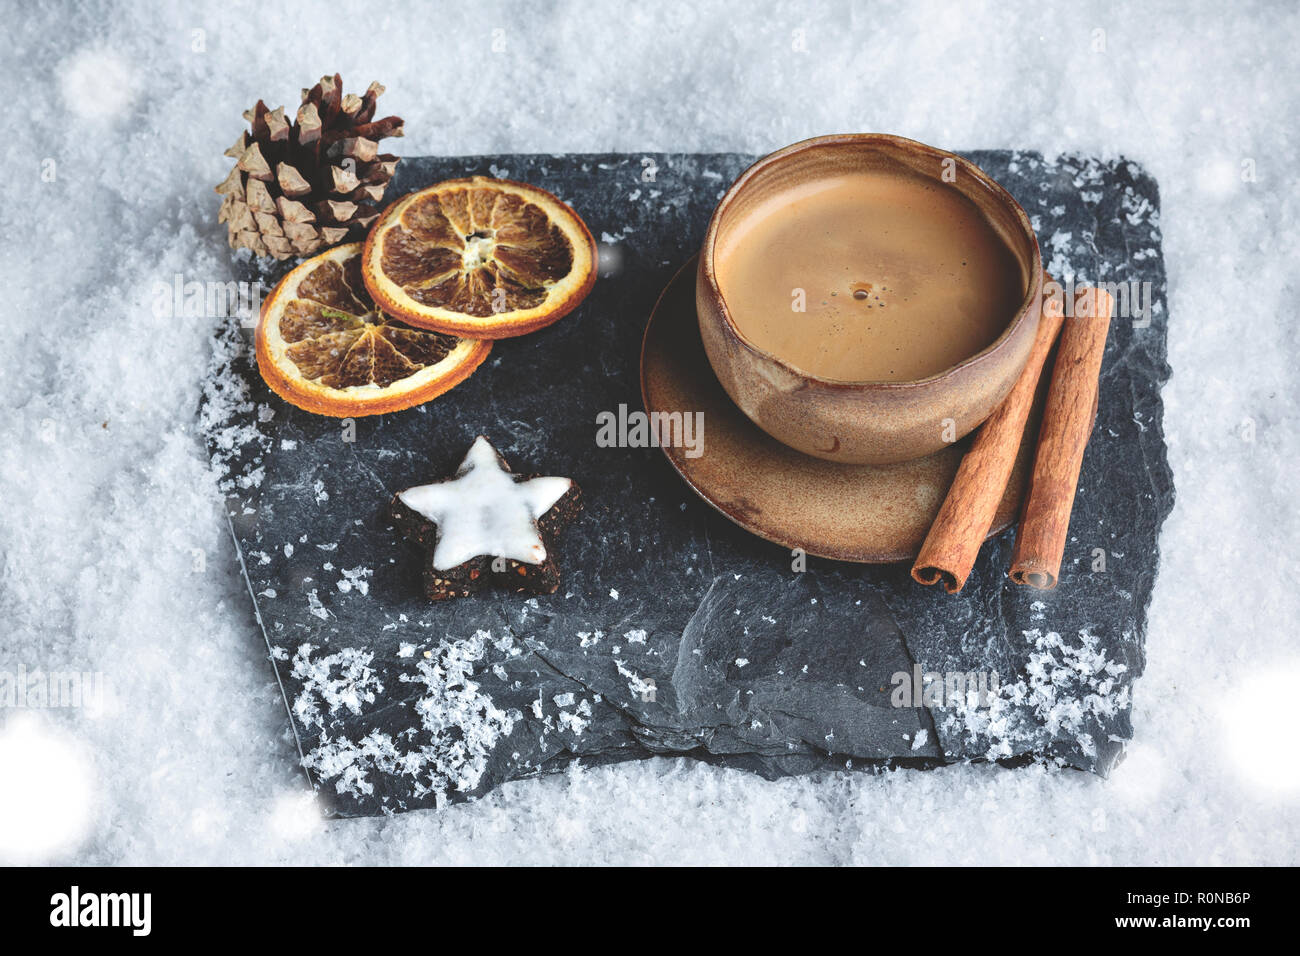 Espresso cup with winter decoration and snow Stock Photo